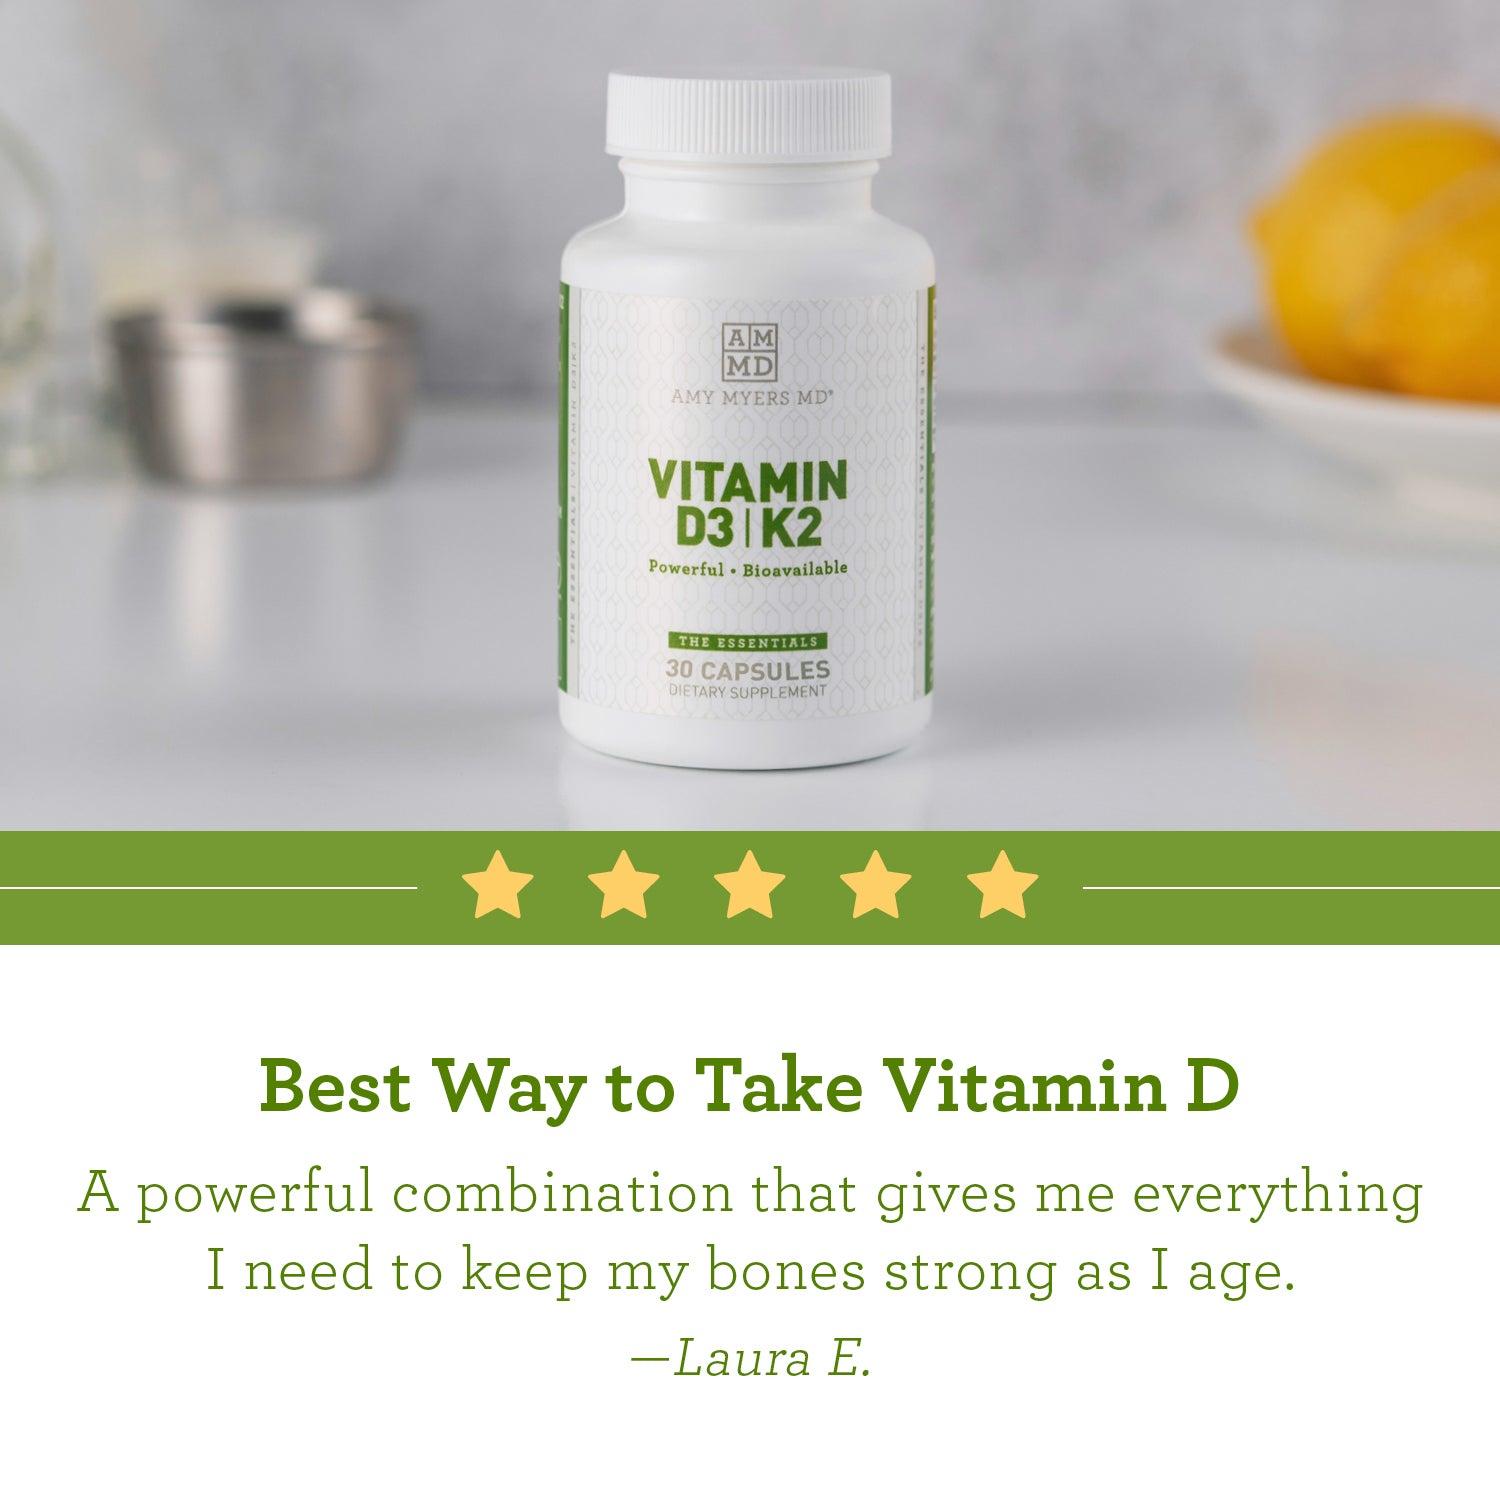 Vitamin D3/K2 Capsules Review Image - Amy Myers MD®